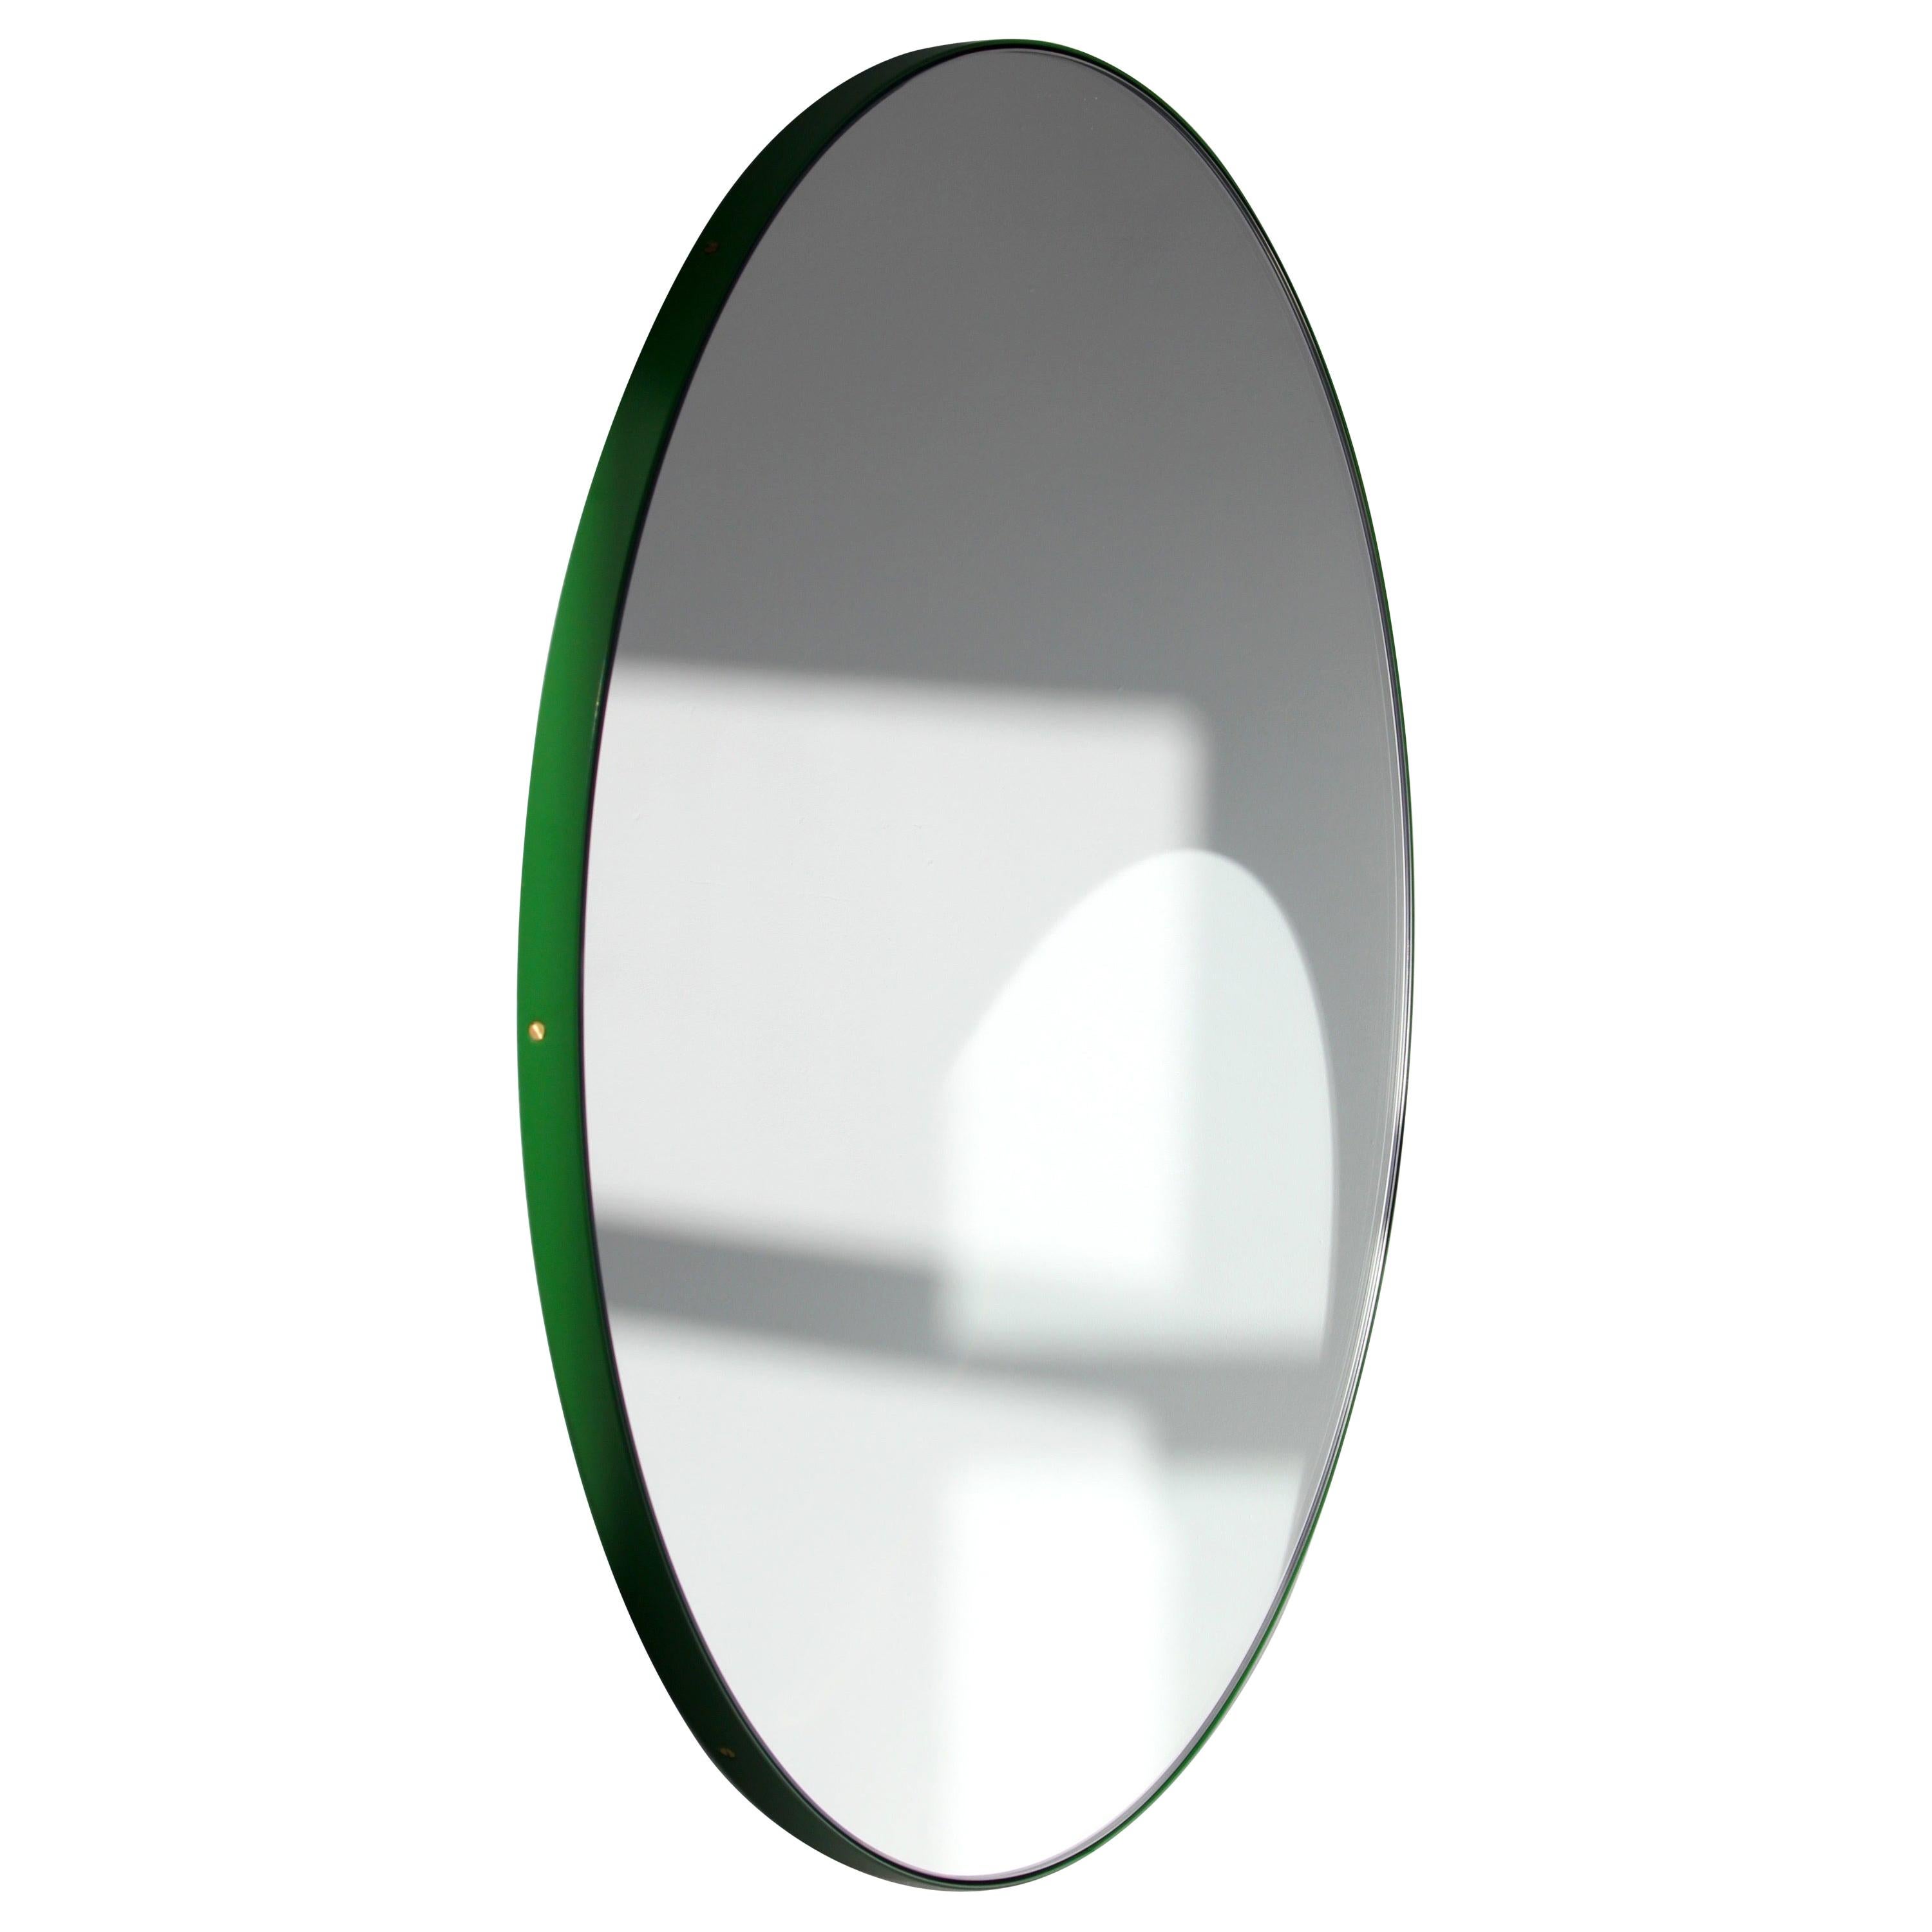 Orbis Round Modern Customisable Mirror with Green Frame, Large For Sale